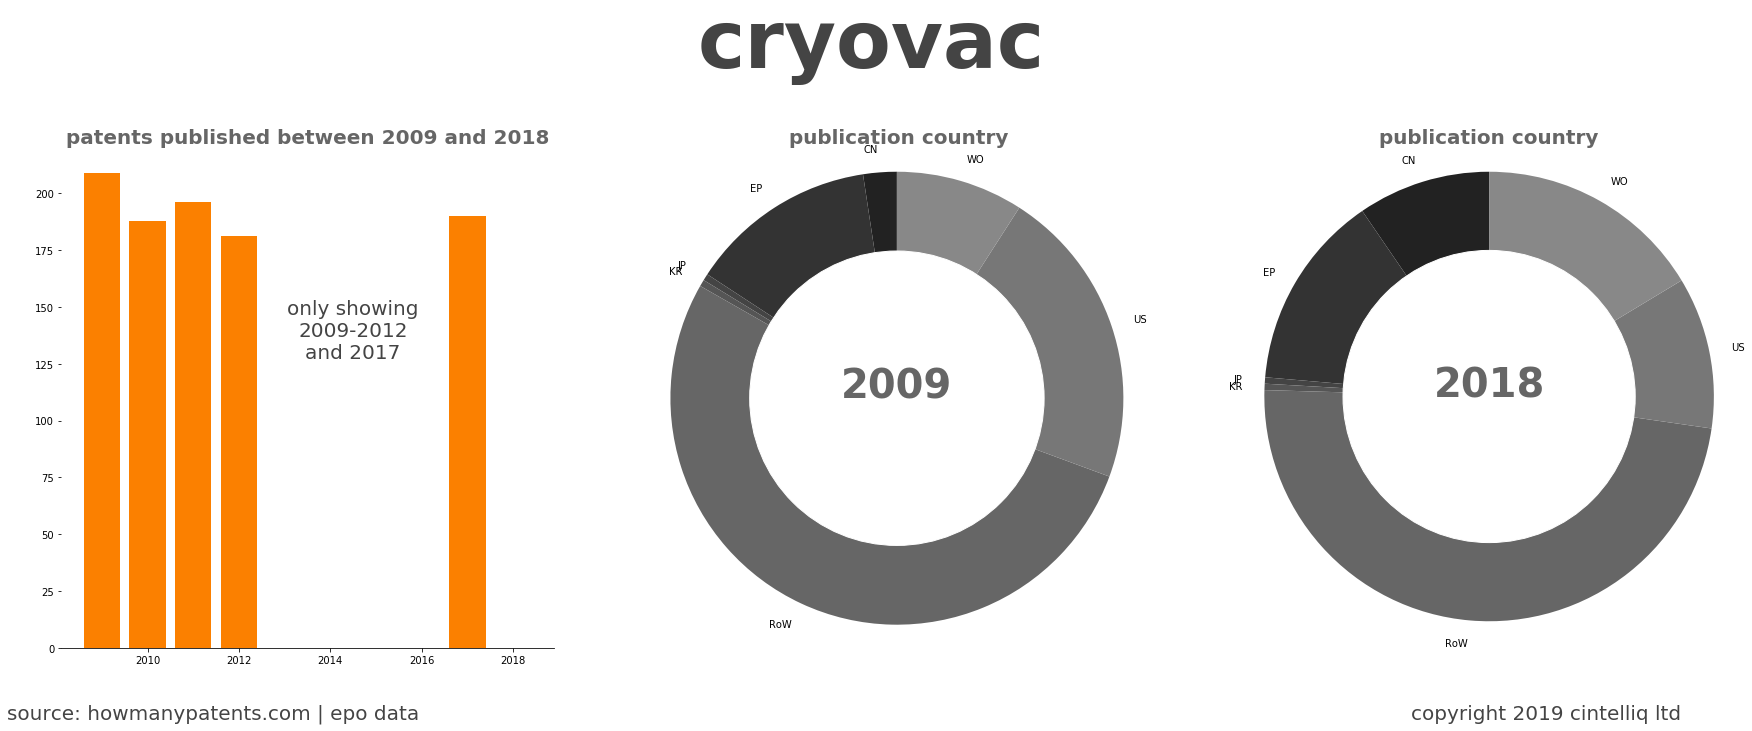 summary of patents for Cryovac